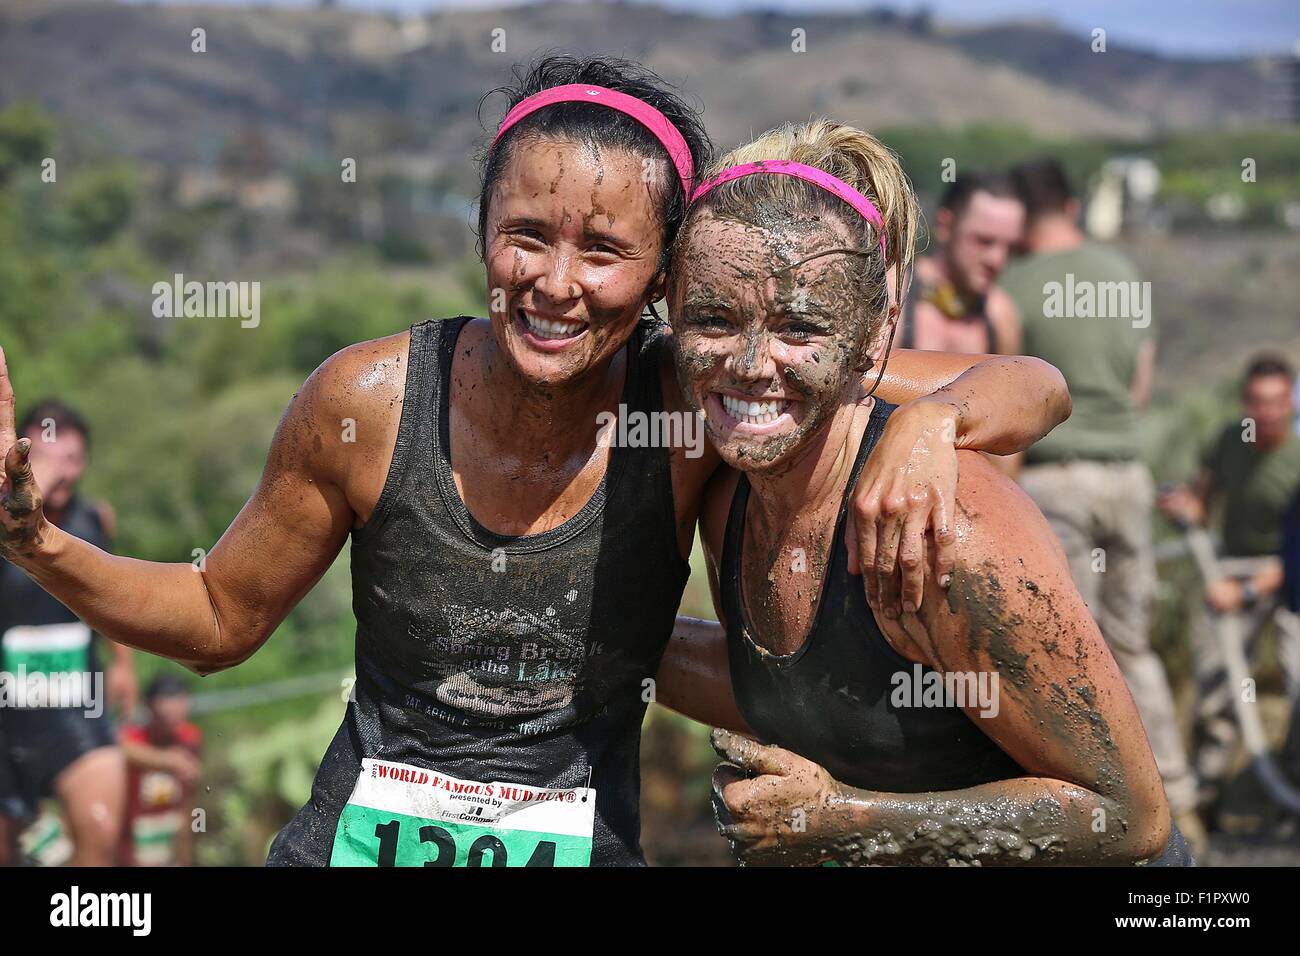 https://c8.alamy.com/comp/F1PXW0/two-women-competitors-smile-as-they-are-covered-in-mud-during-the-F1PXW0.jpg